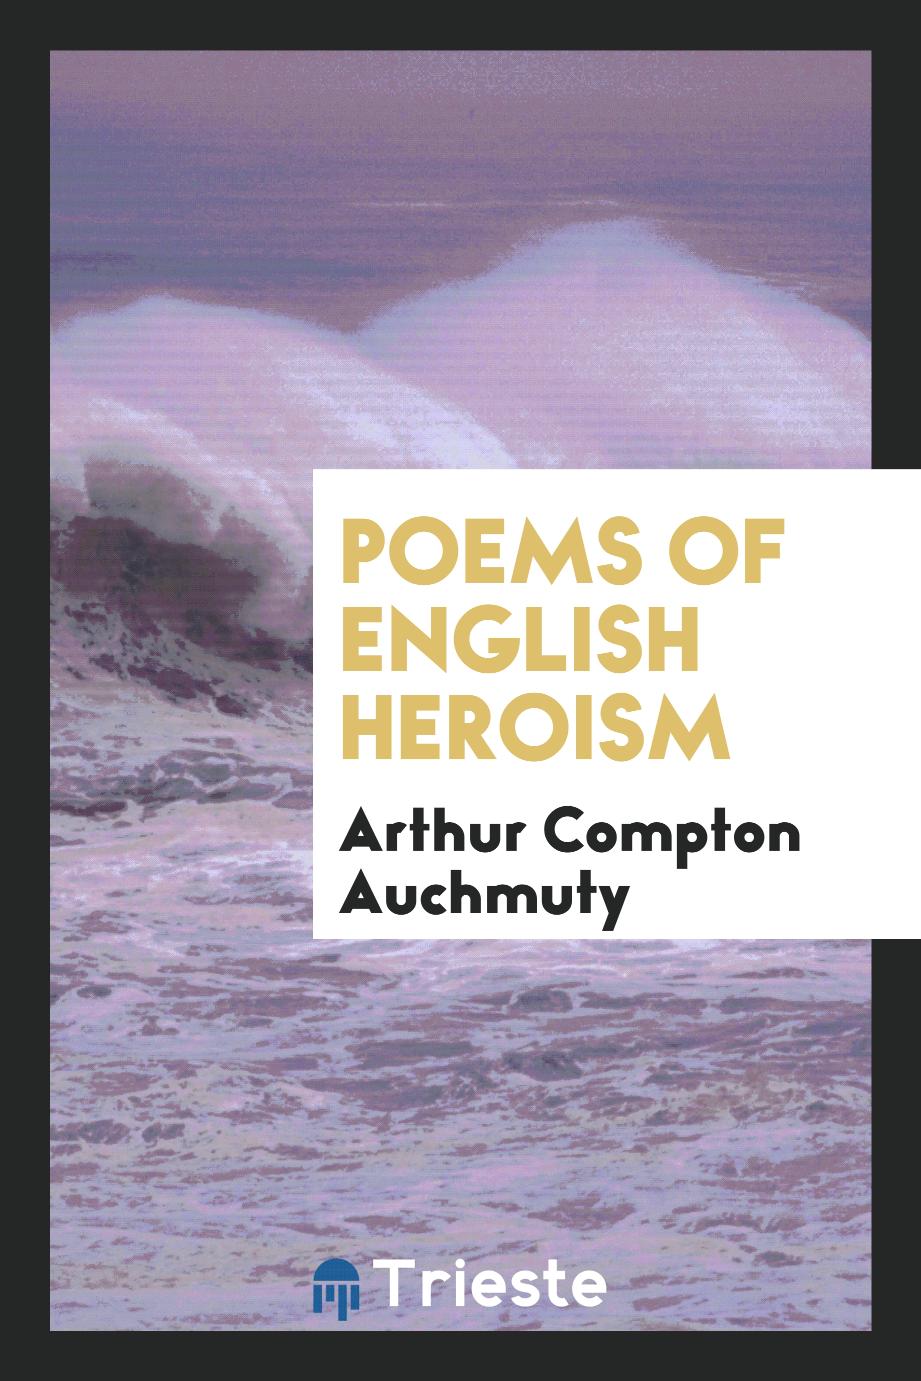 Poems of English Heroism